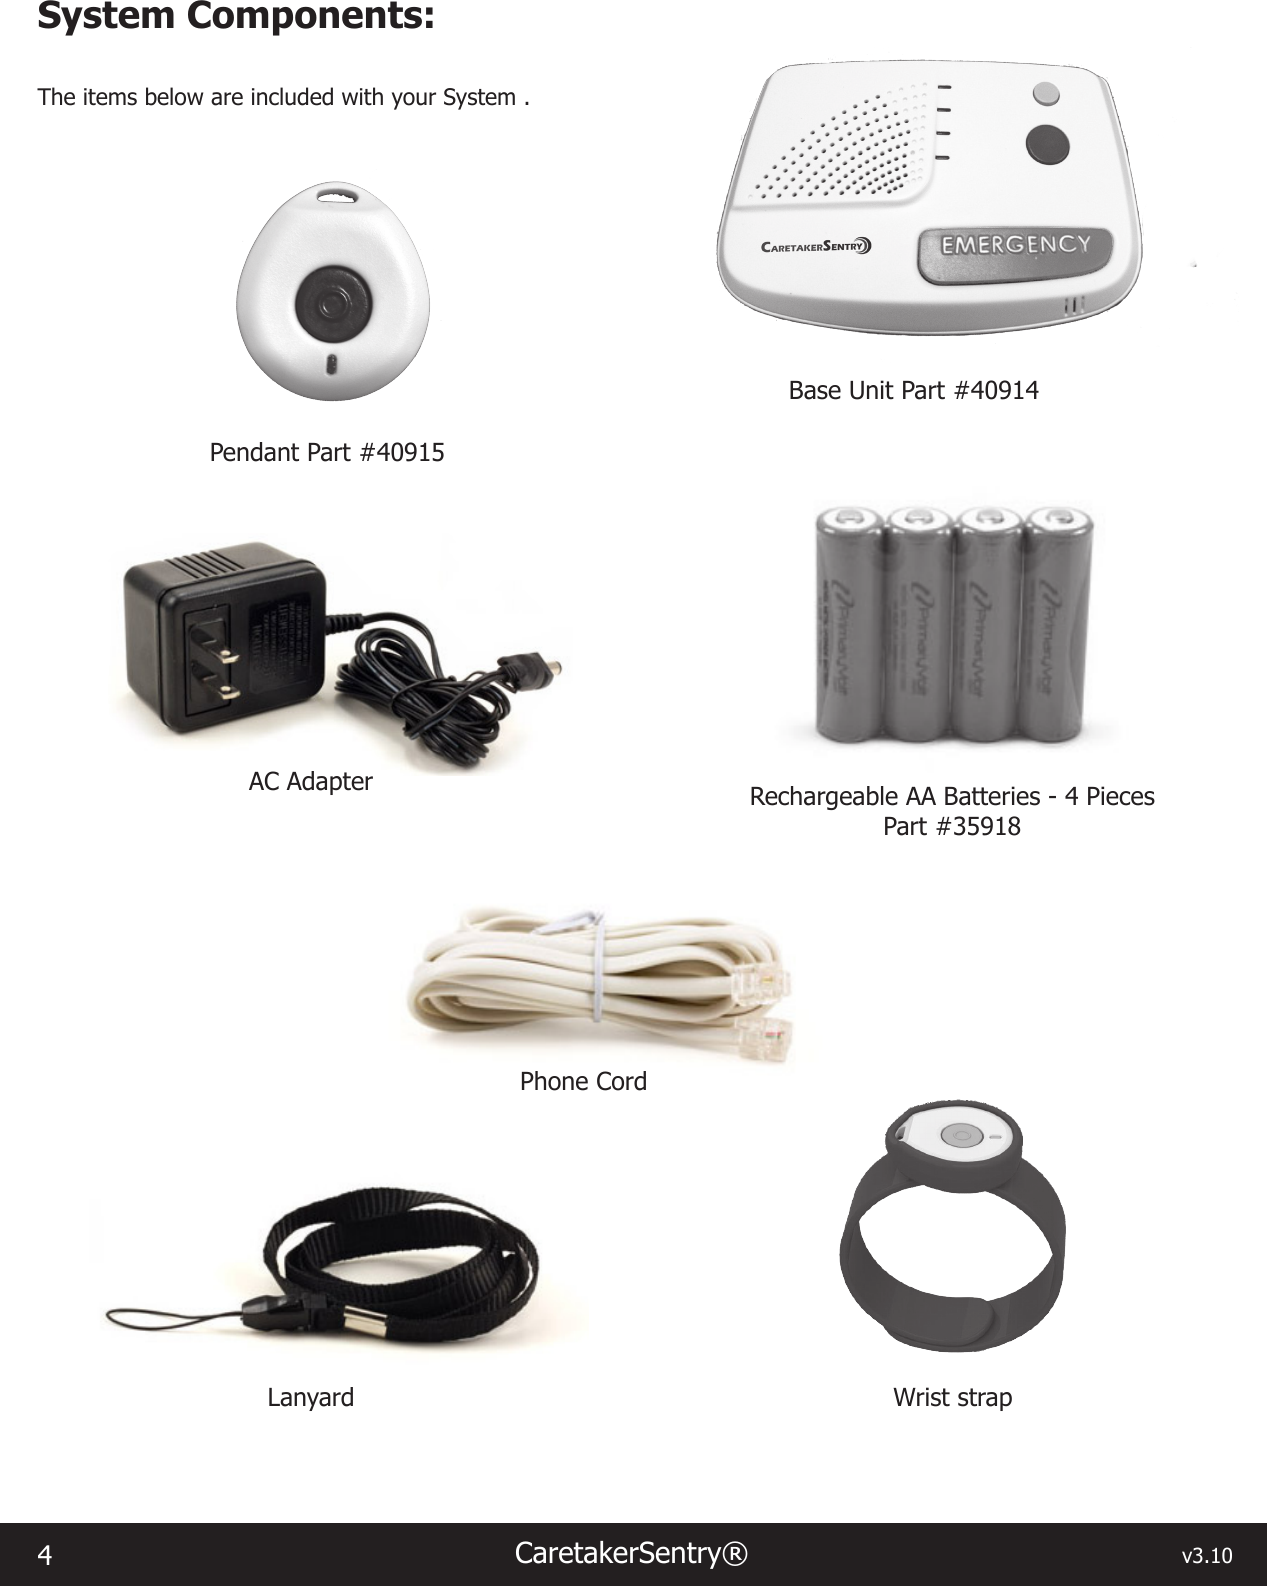 4CaretakerSentry®                                                                                  v3.10Pendant Part #40915AC AdapterPhone CordWrist strapLanyardRechargeable AA Batteries - 4 PiecesPart #35918System Components:The items below are included with your System . Base Unit Part #40914